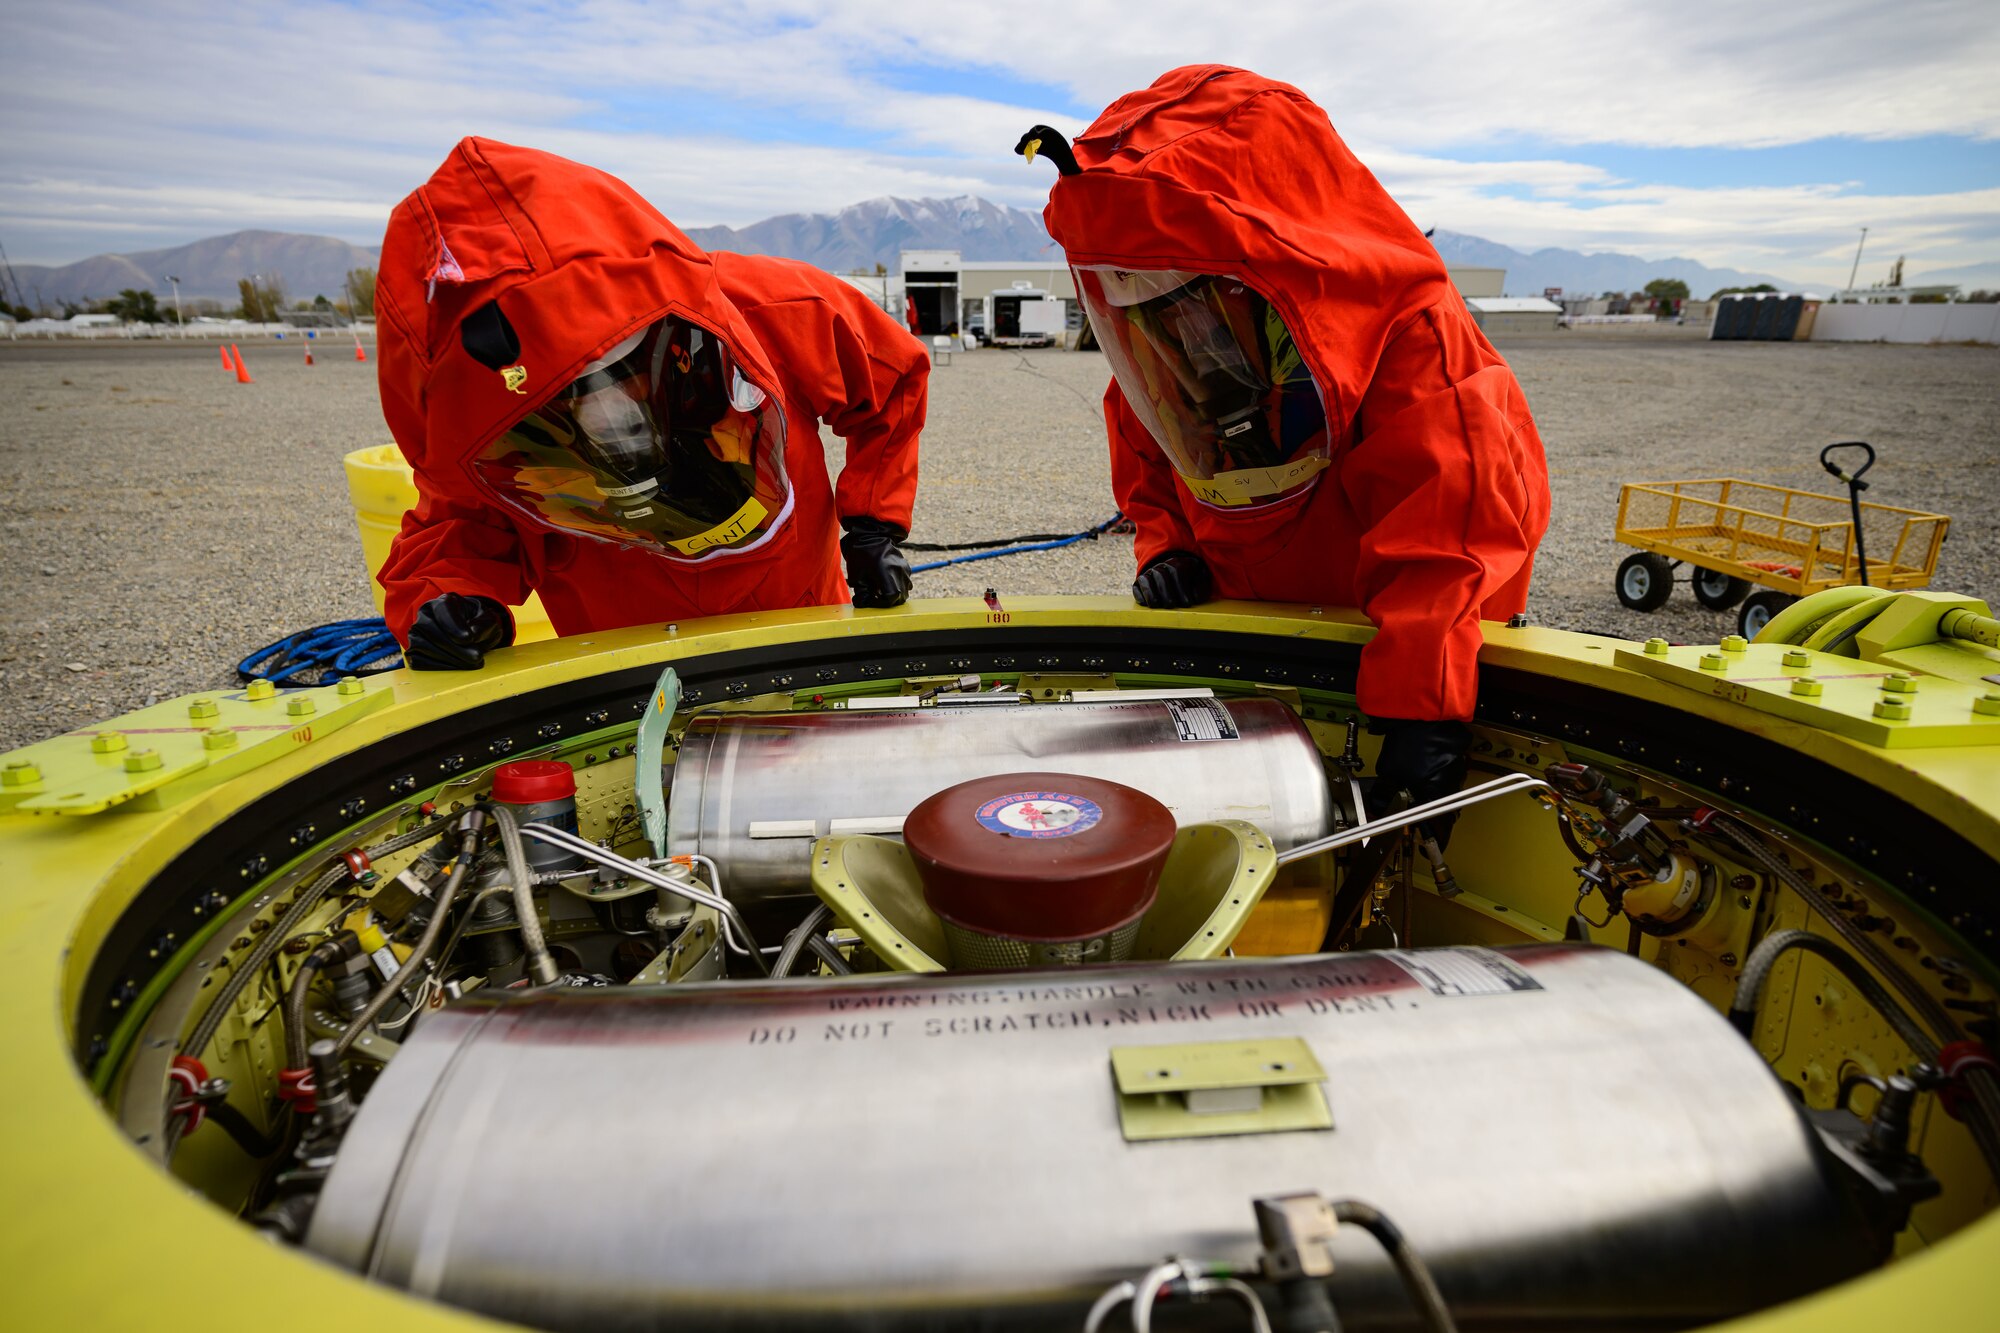 Members of the Missile Mishap Recovery Team work to recover a missile guidance system during an exercise simulating a transportation accident involving a missile component containing hazardous material at the Box Elder County Fairgrounds, Tremonton, Utah, Nov. 2, 2023. The MMRT is on call 24/7, 365 days a year to respond to any number of situations involving an intercontinental ballistic missile where technical procedures do not exist to address the mishap or the loss of life is possible. (U.S. Air Force photo by R. Nial Bradshaw)